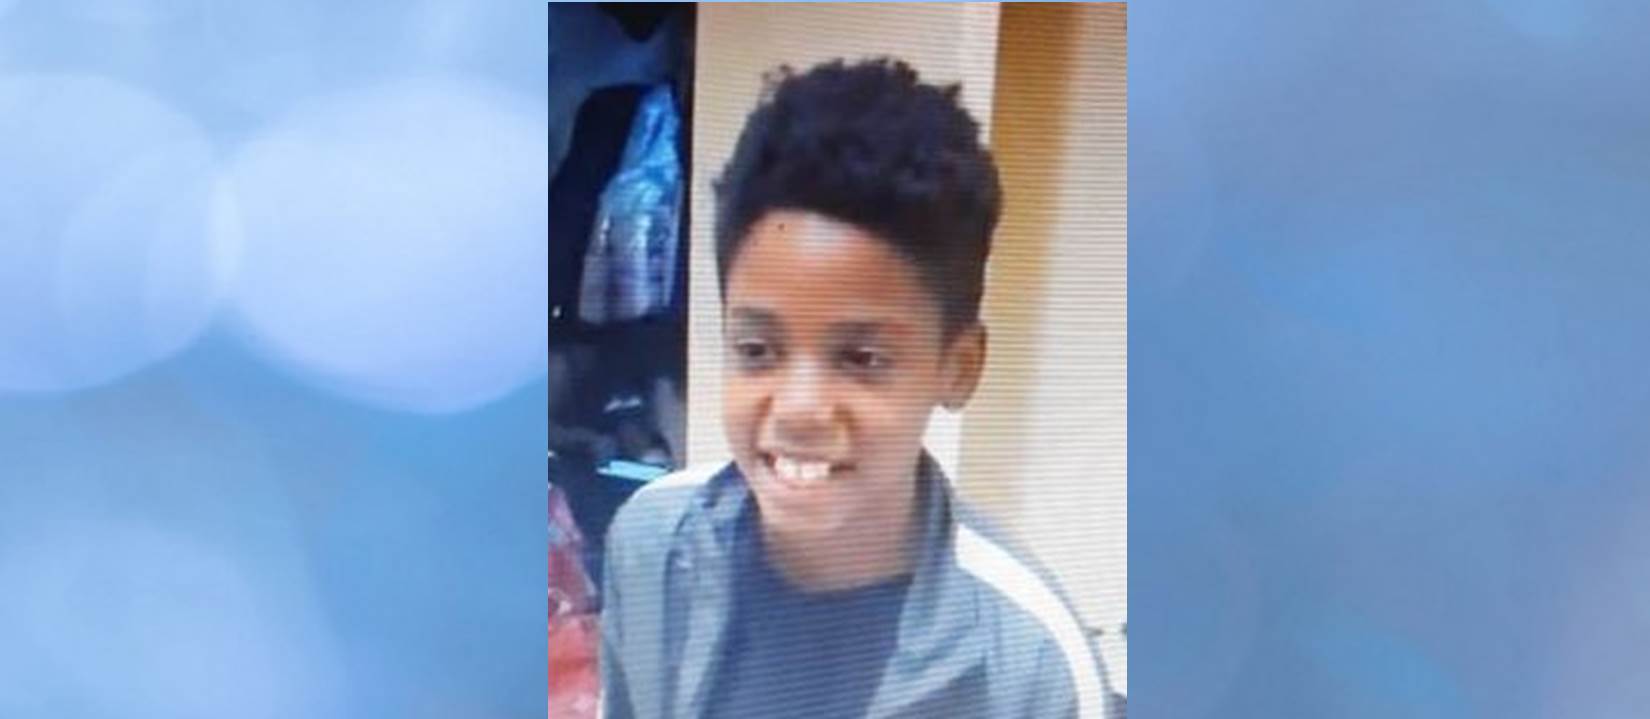 Moziah was last seen yesterday evening at his home in Handsworth, Birmingham